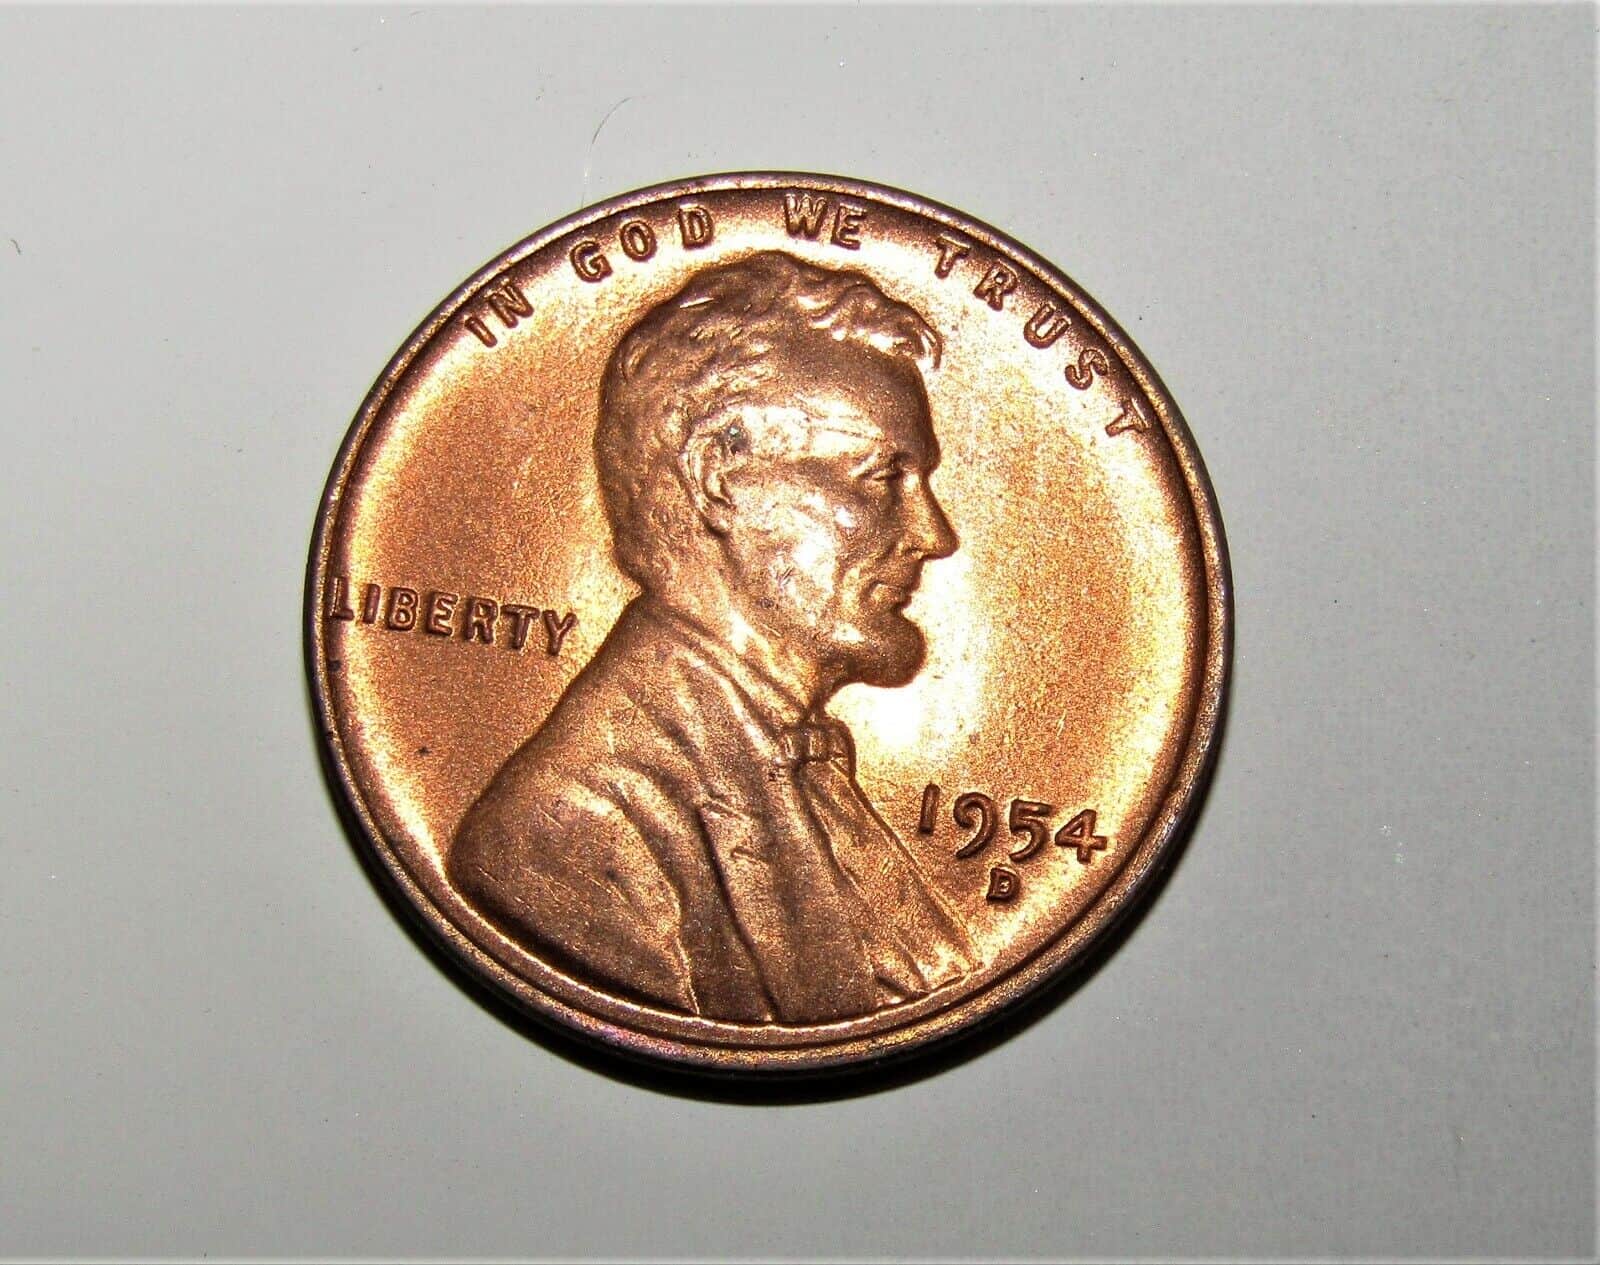 1954 Wheat Penny Repunched Mint Mark